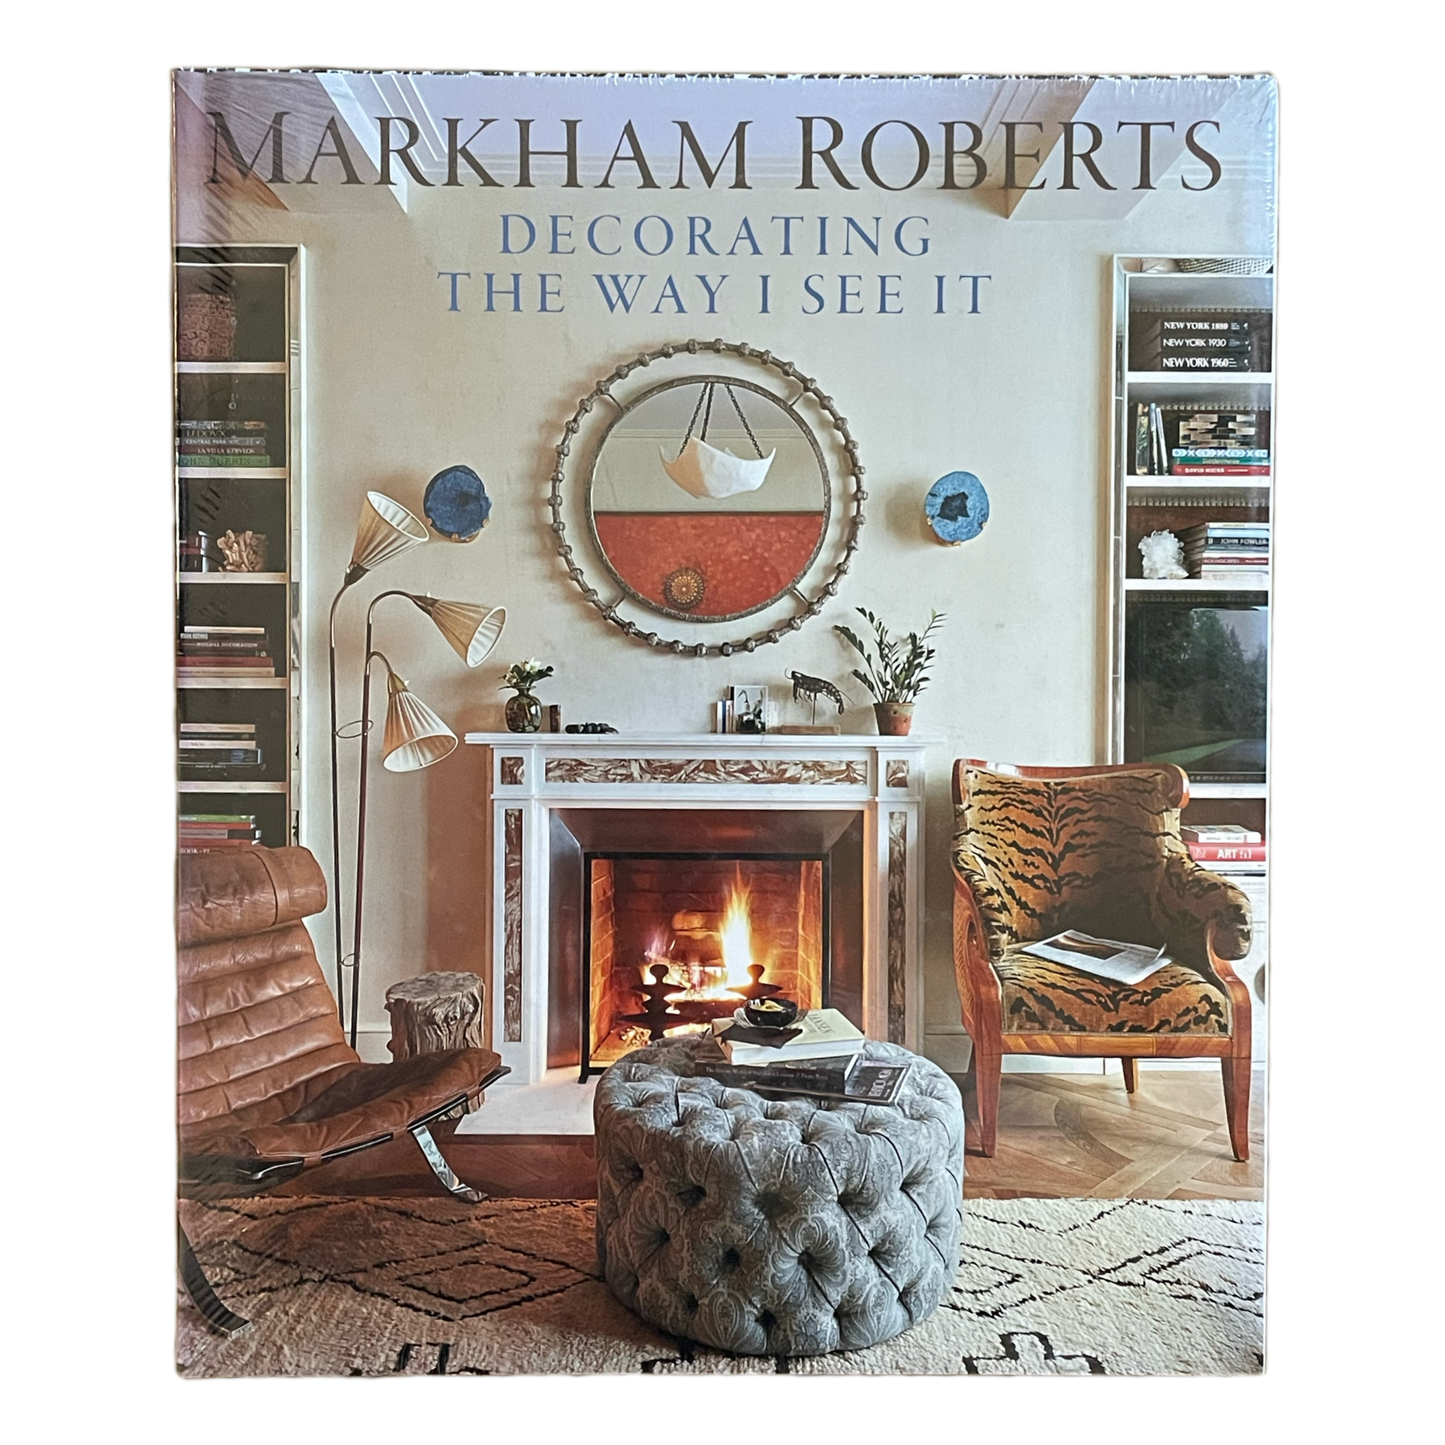 Decorating The Way I See It by Markham Roberts